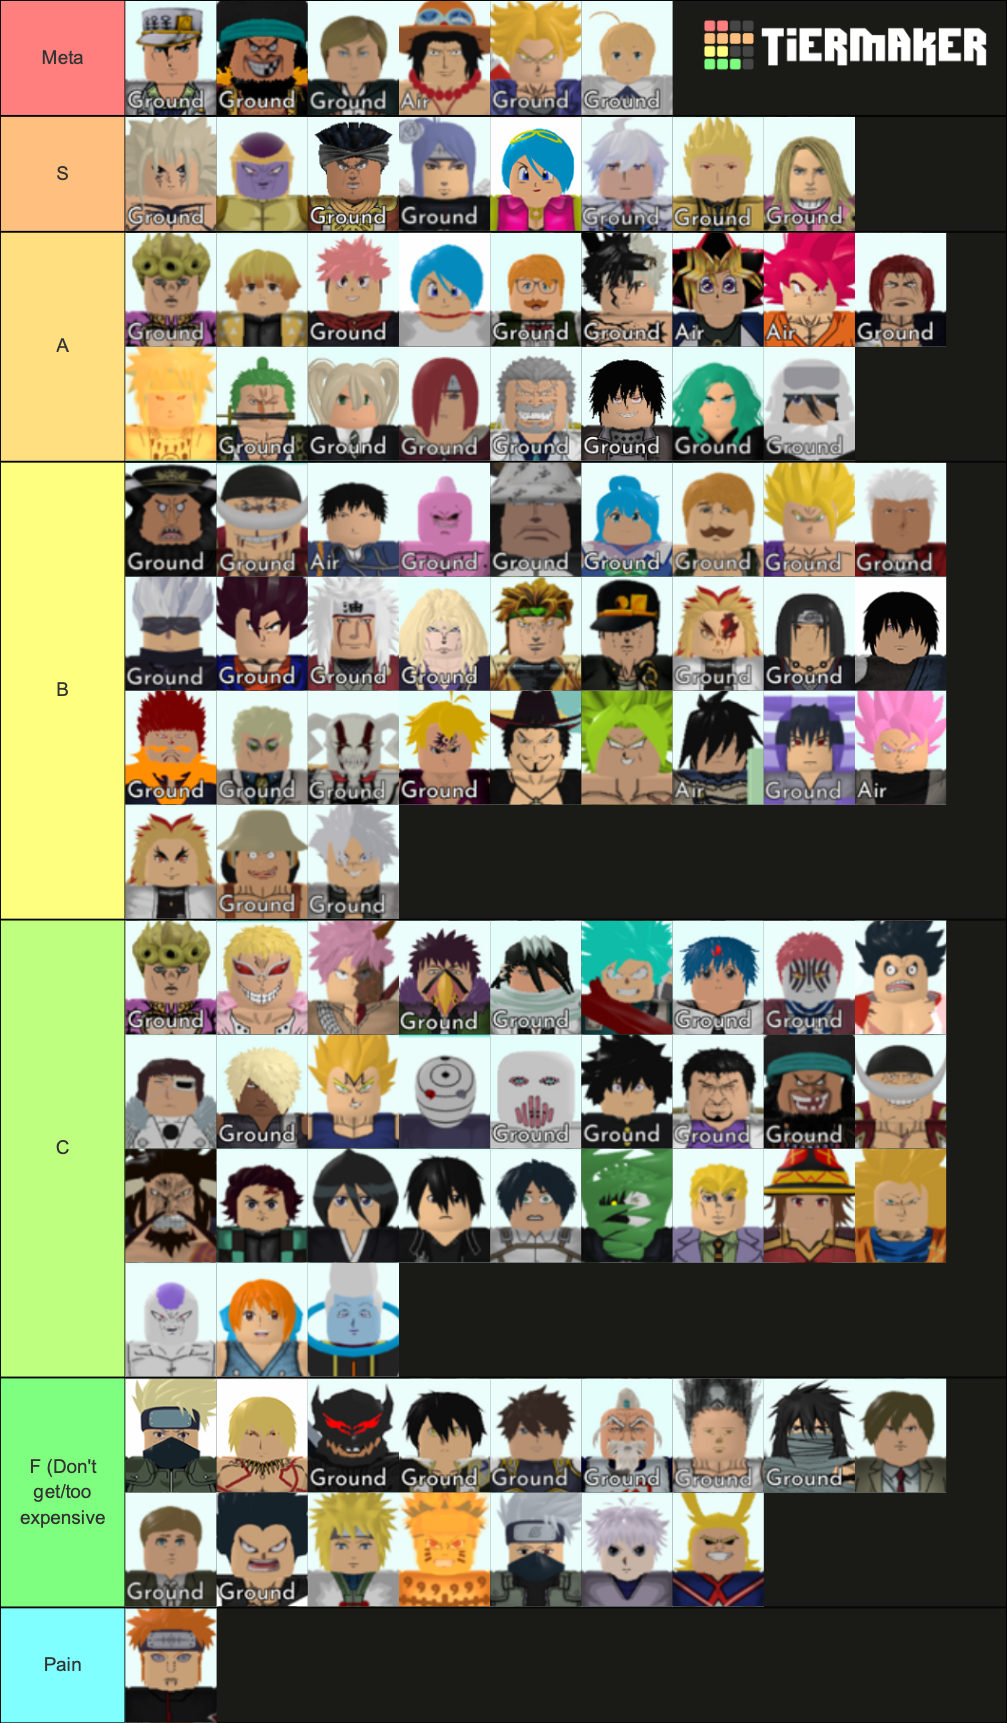 Create a Roblox All Star Tower Defense Tier List - TierMaker